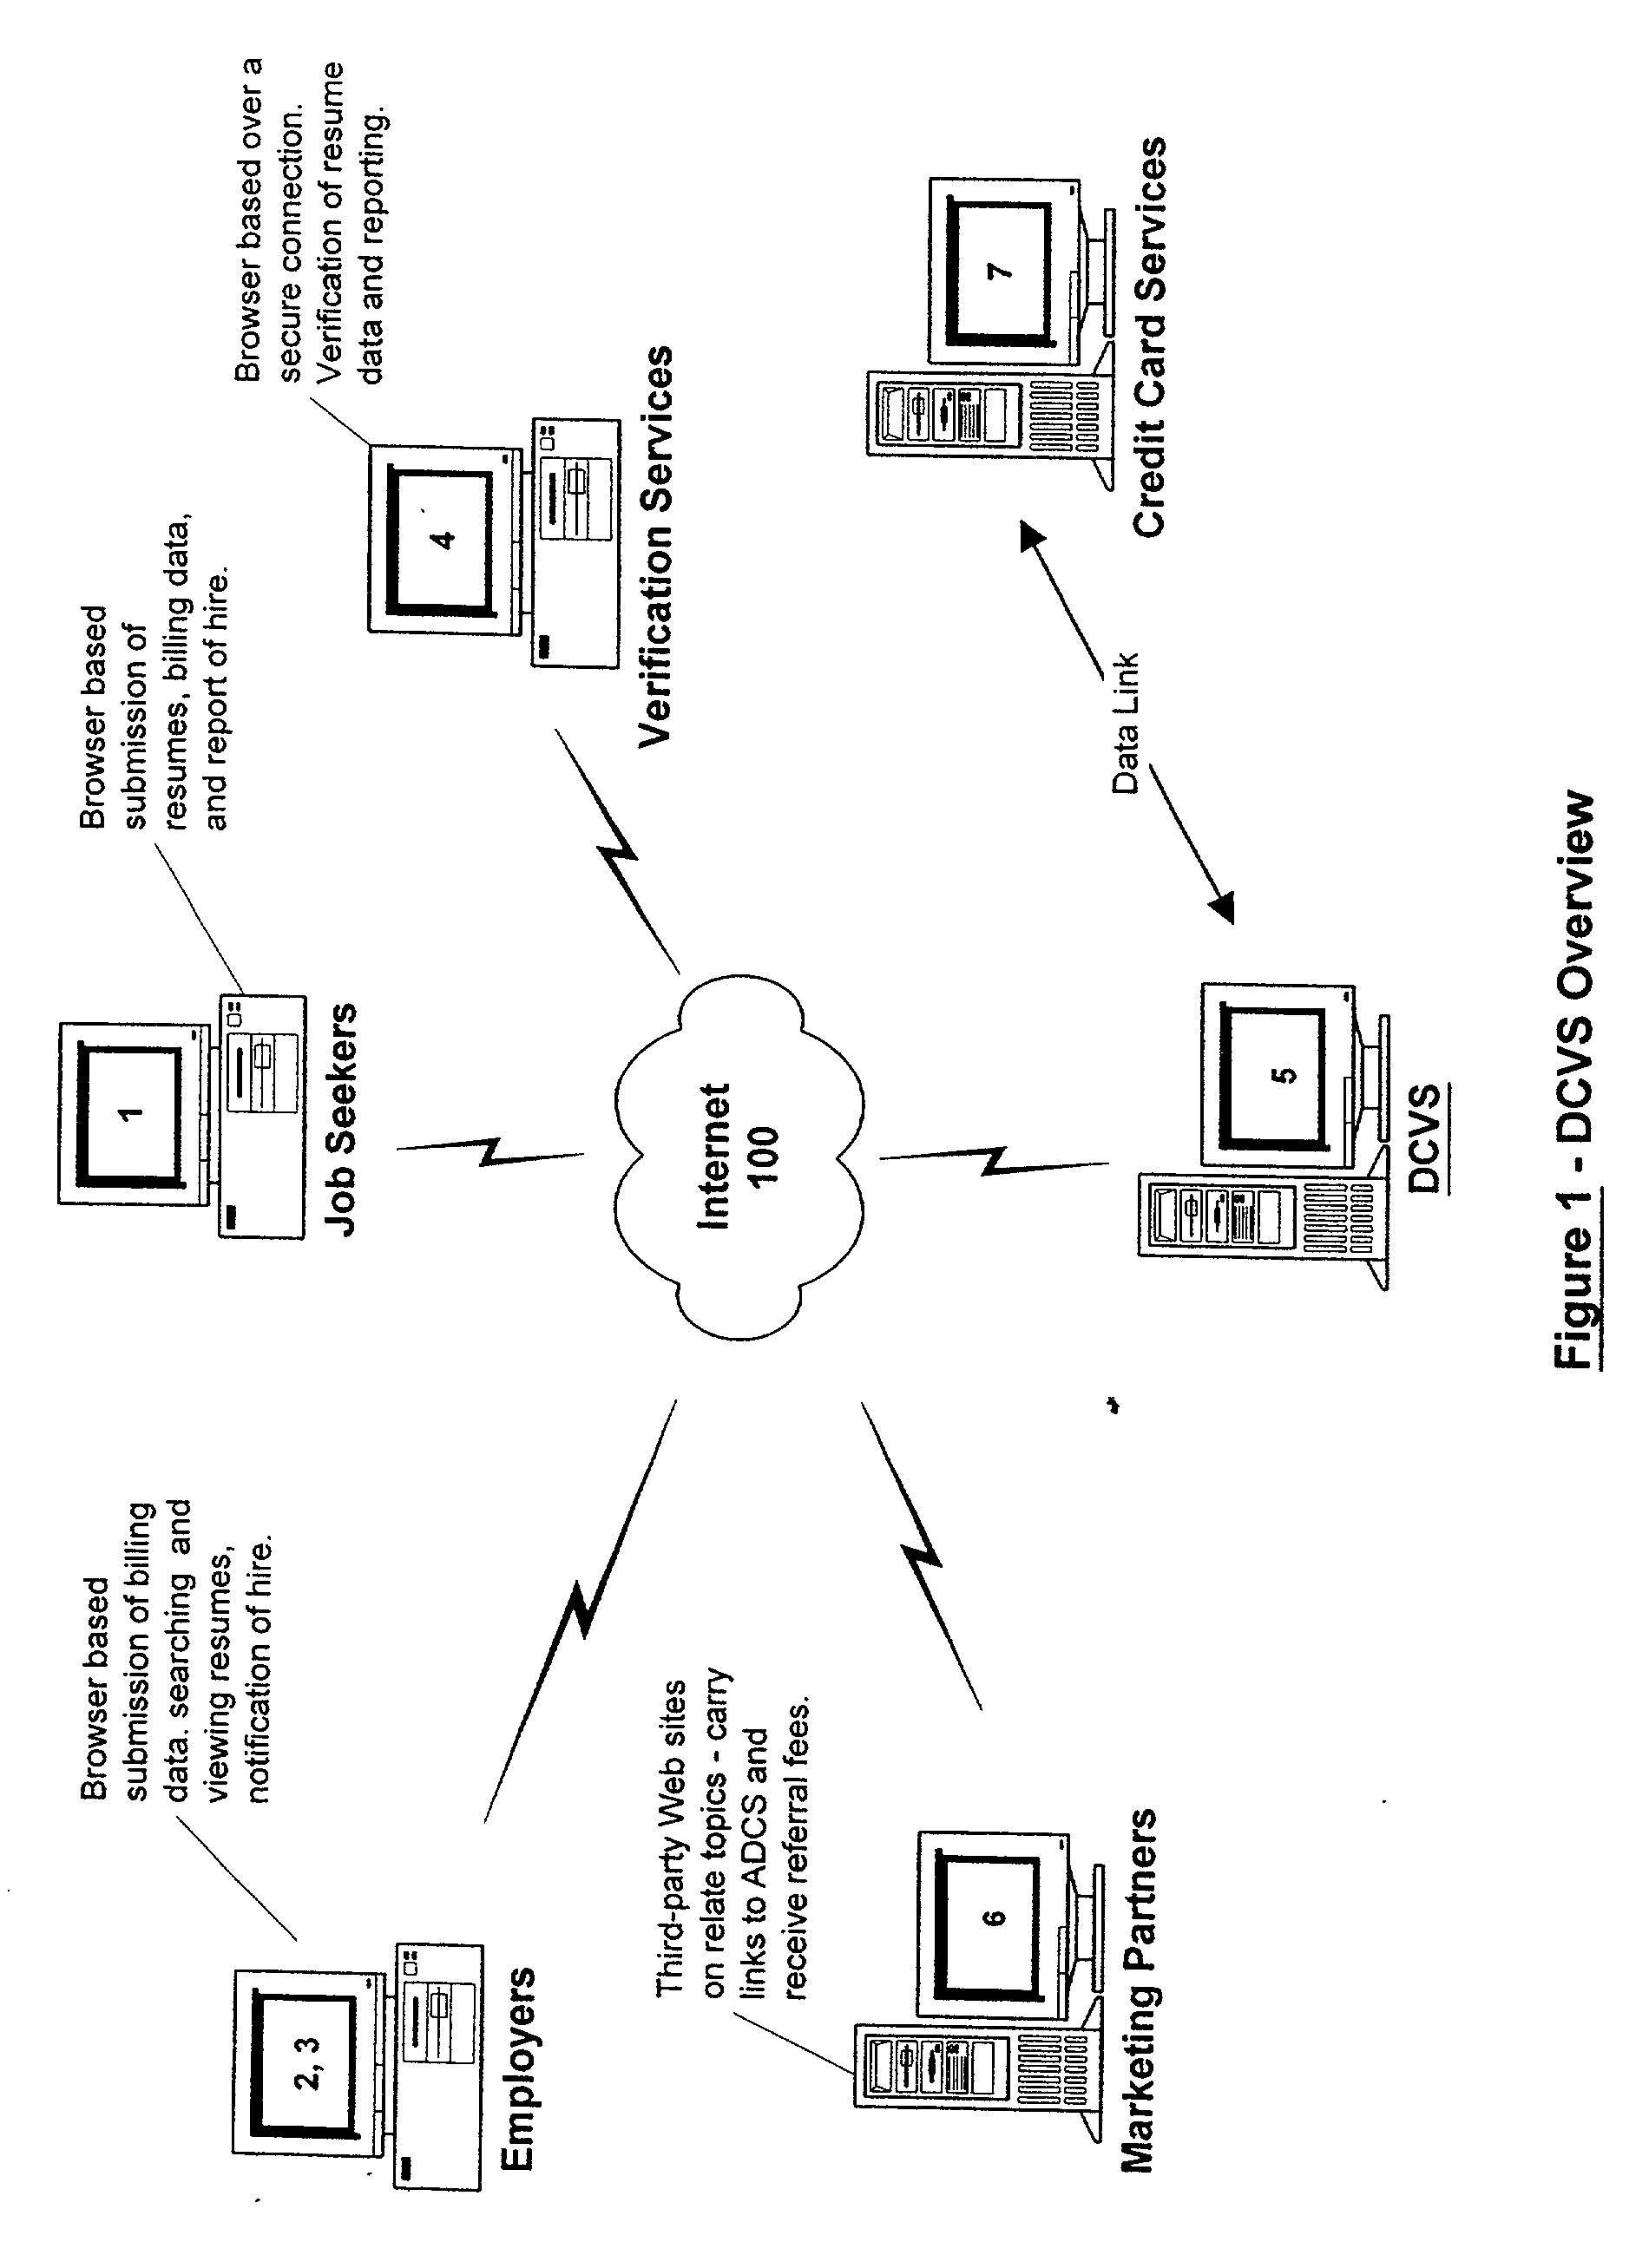 Data certification and verification system having a multiple- user-controlled data interface